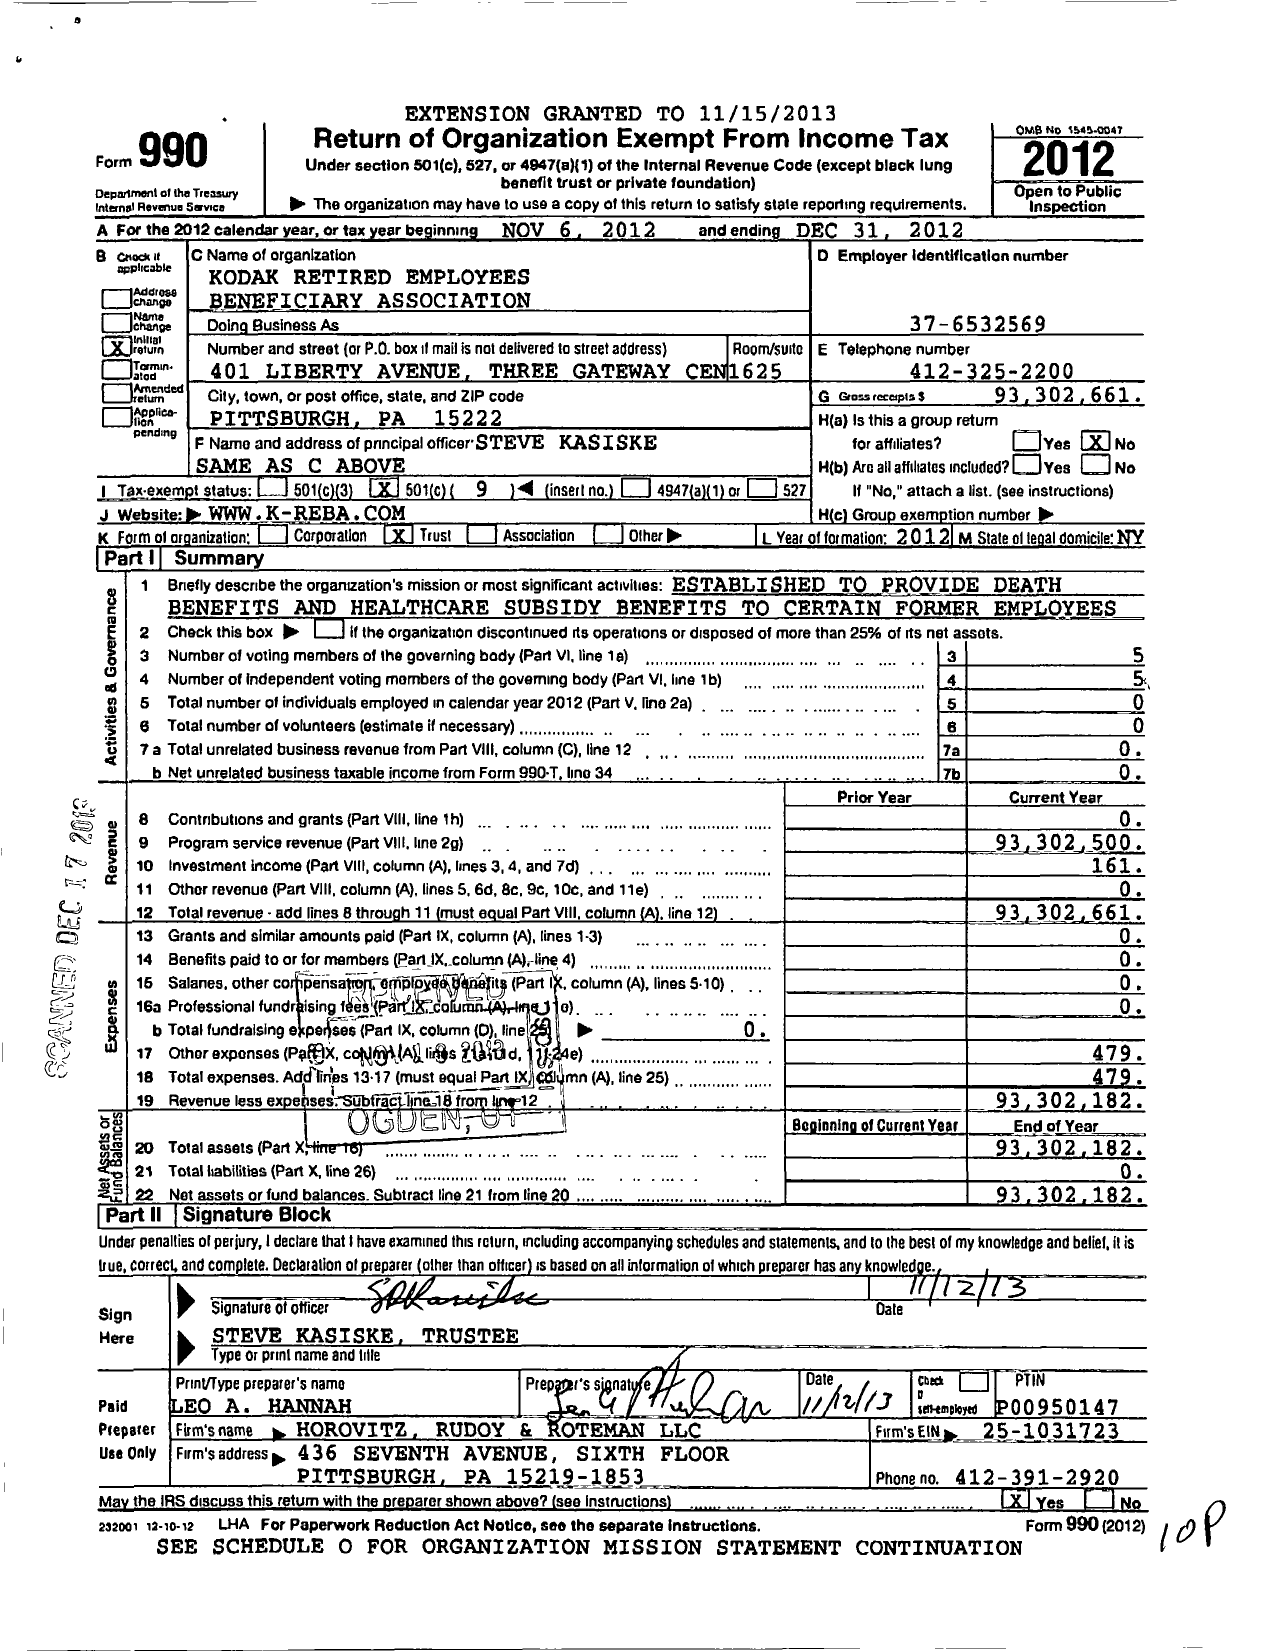 Image of first page of 2012 Form 990O for Kodak Retired Employees Beneficiary Association